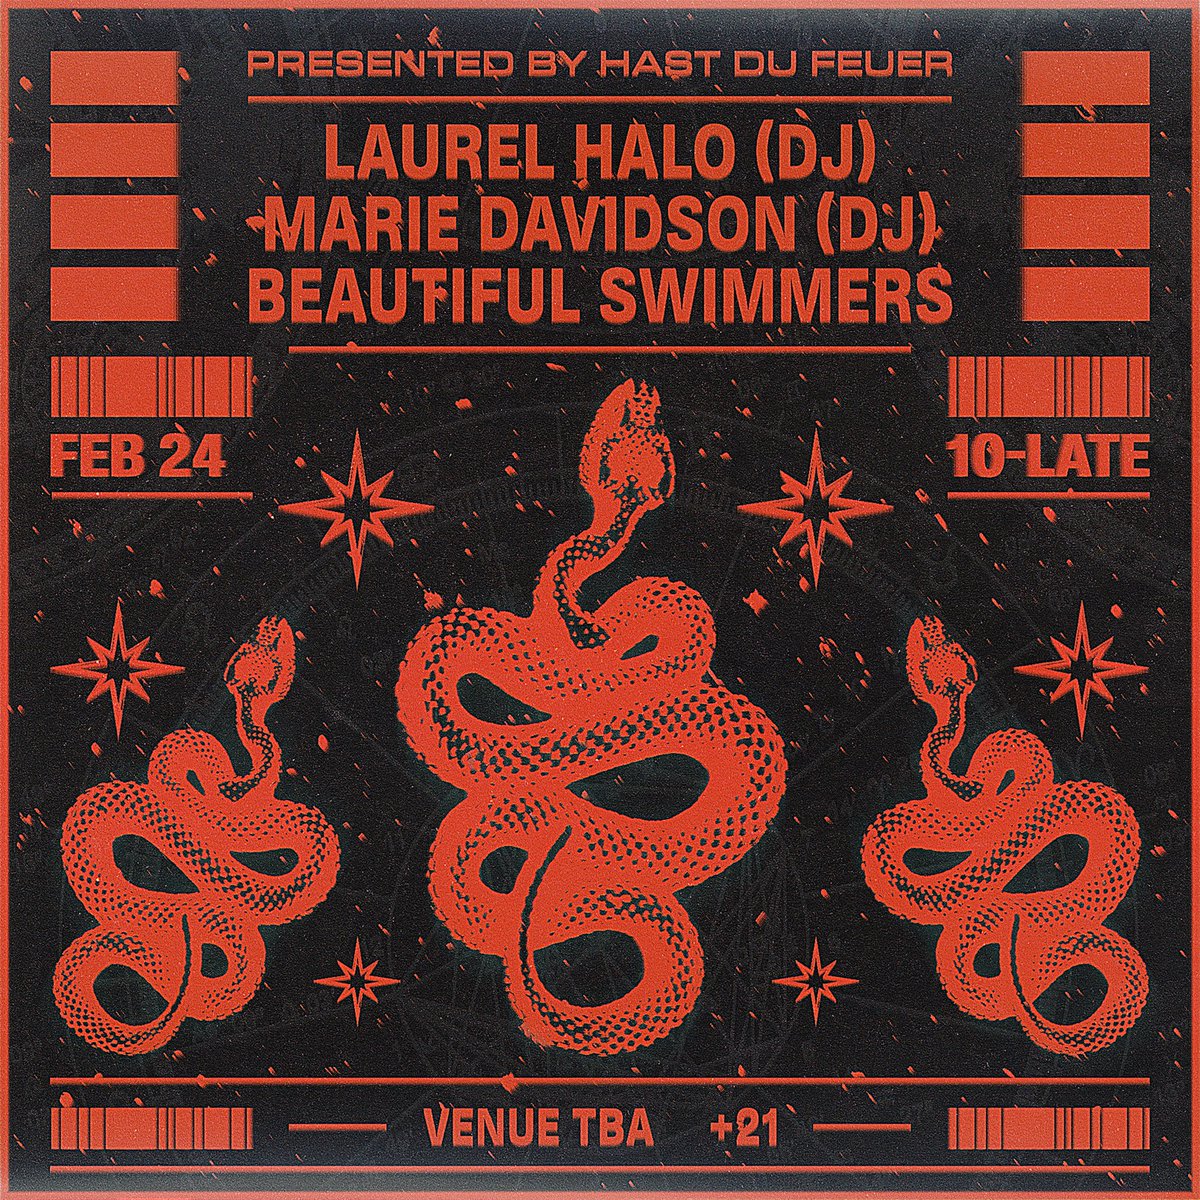 🚨 ANNOUNCEMENT 🚨

Get ready for an exclusive night on Friday, Feb 24th with @LaurelHalo & @mariedavidsn as they embark on their joint US tour. They’ll be joined by DC’s own Beautiful Swimmers aka @FutureTiming & @WRLDBLDNG ! 

Grab those tickets quick: ra.co/events/1633540